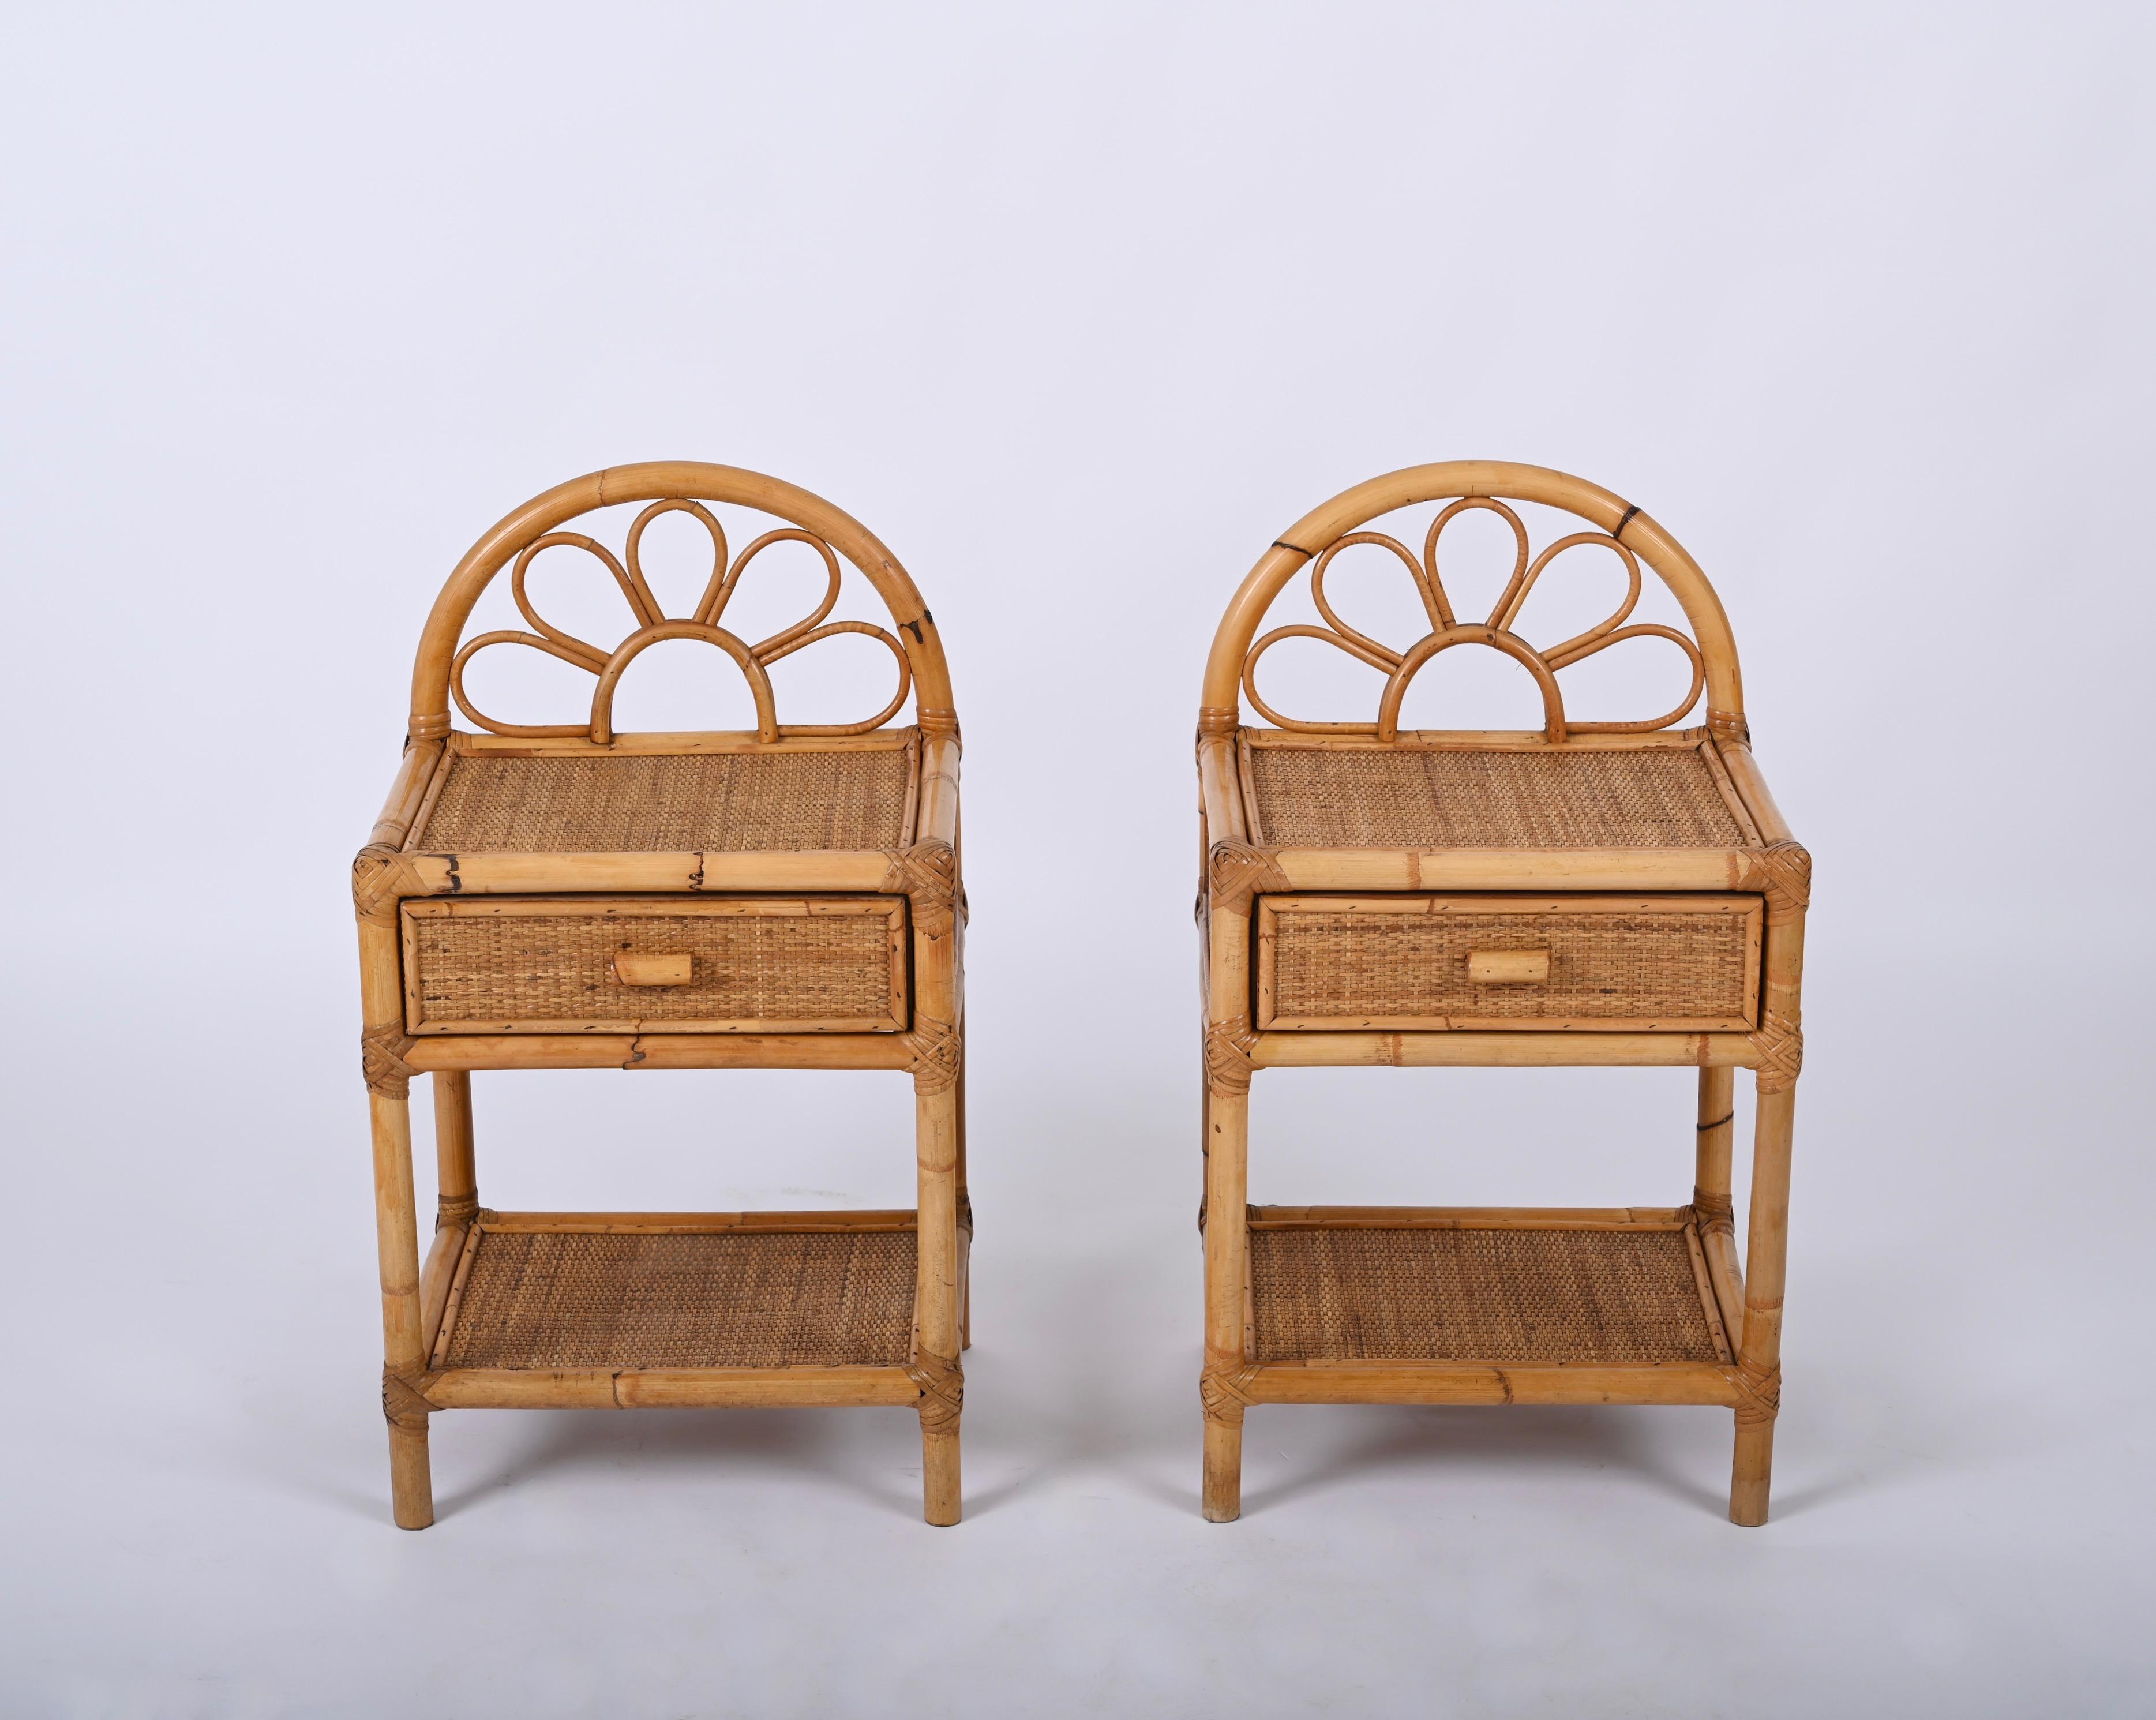 Wicker Pair of Mid-Century Modern Bamboo Cane and Rattan Italian Bedside Tables, 1970s